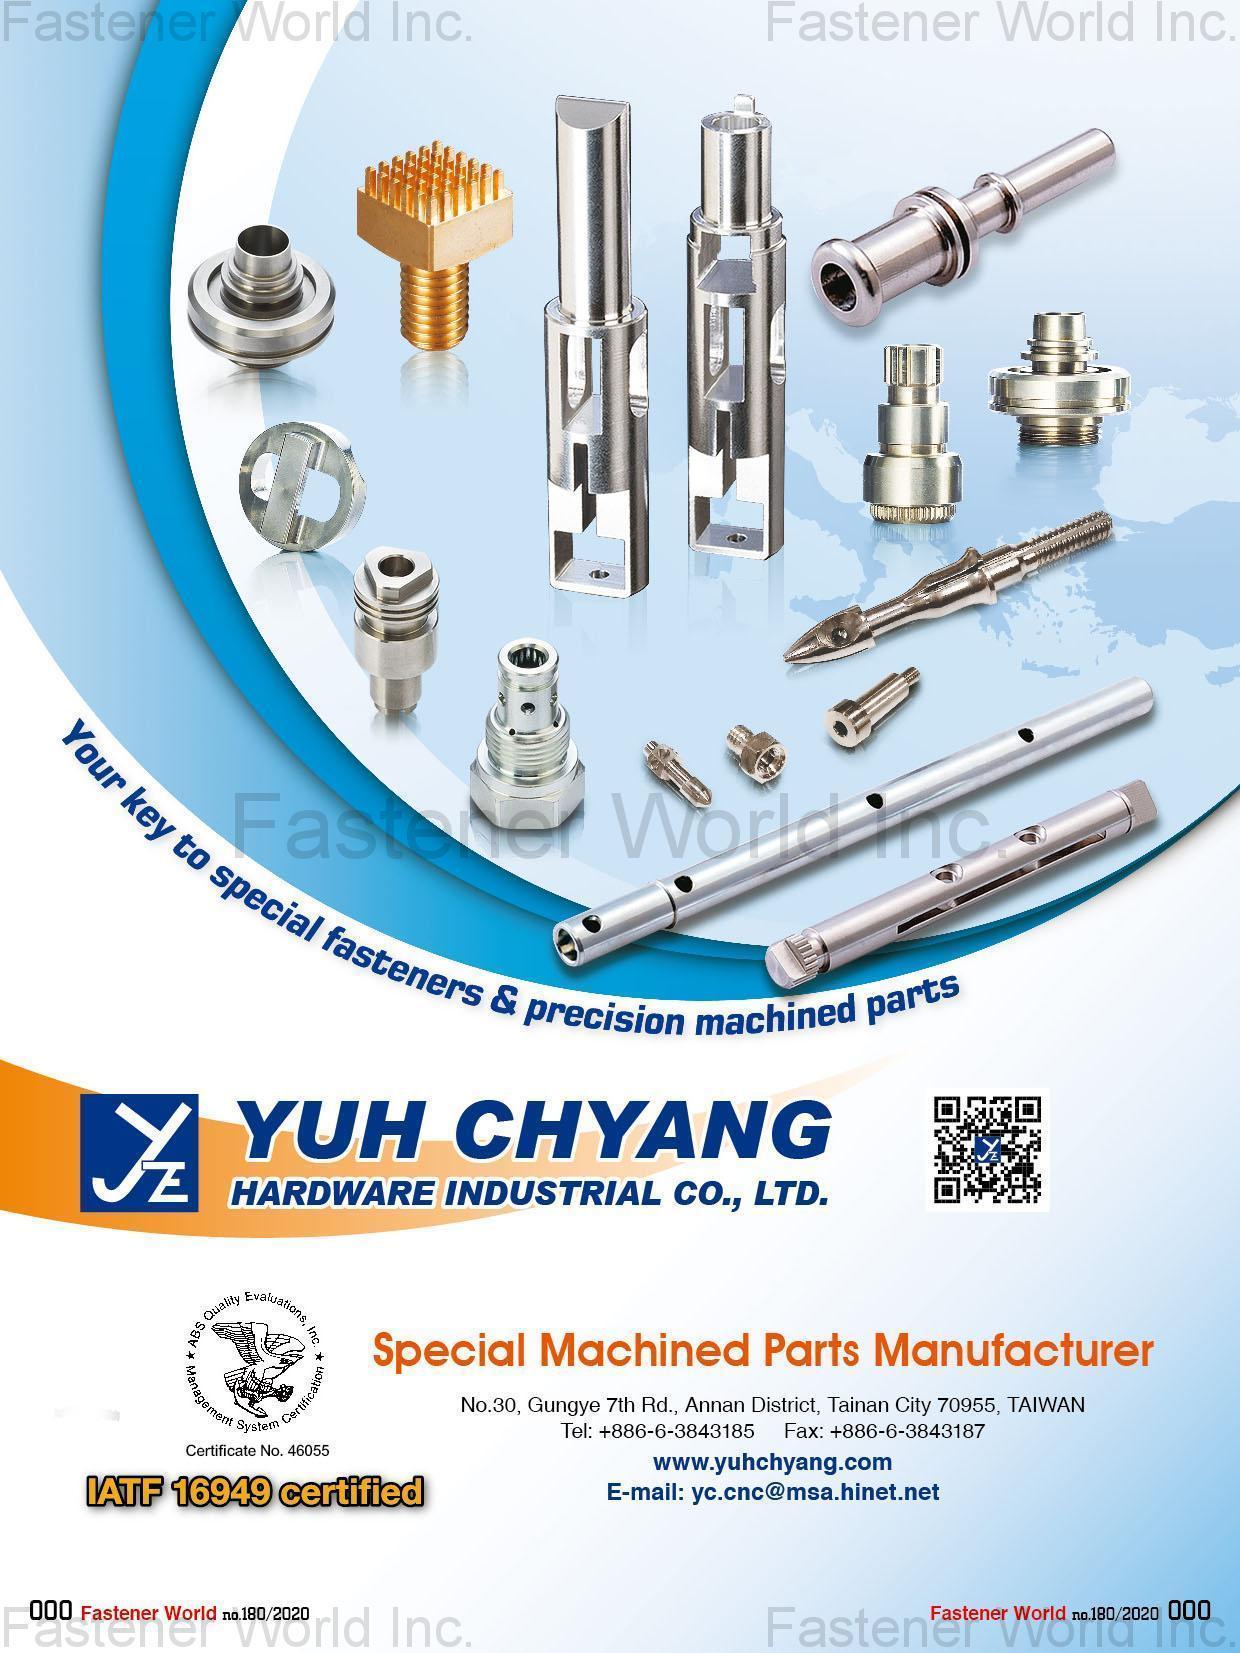 YUH CHYANG HARDWARE INDUSTRIAL CO., LTD.  , Manufacturer of Special Machined Parts , Special Parts